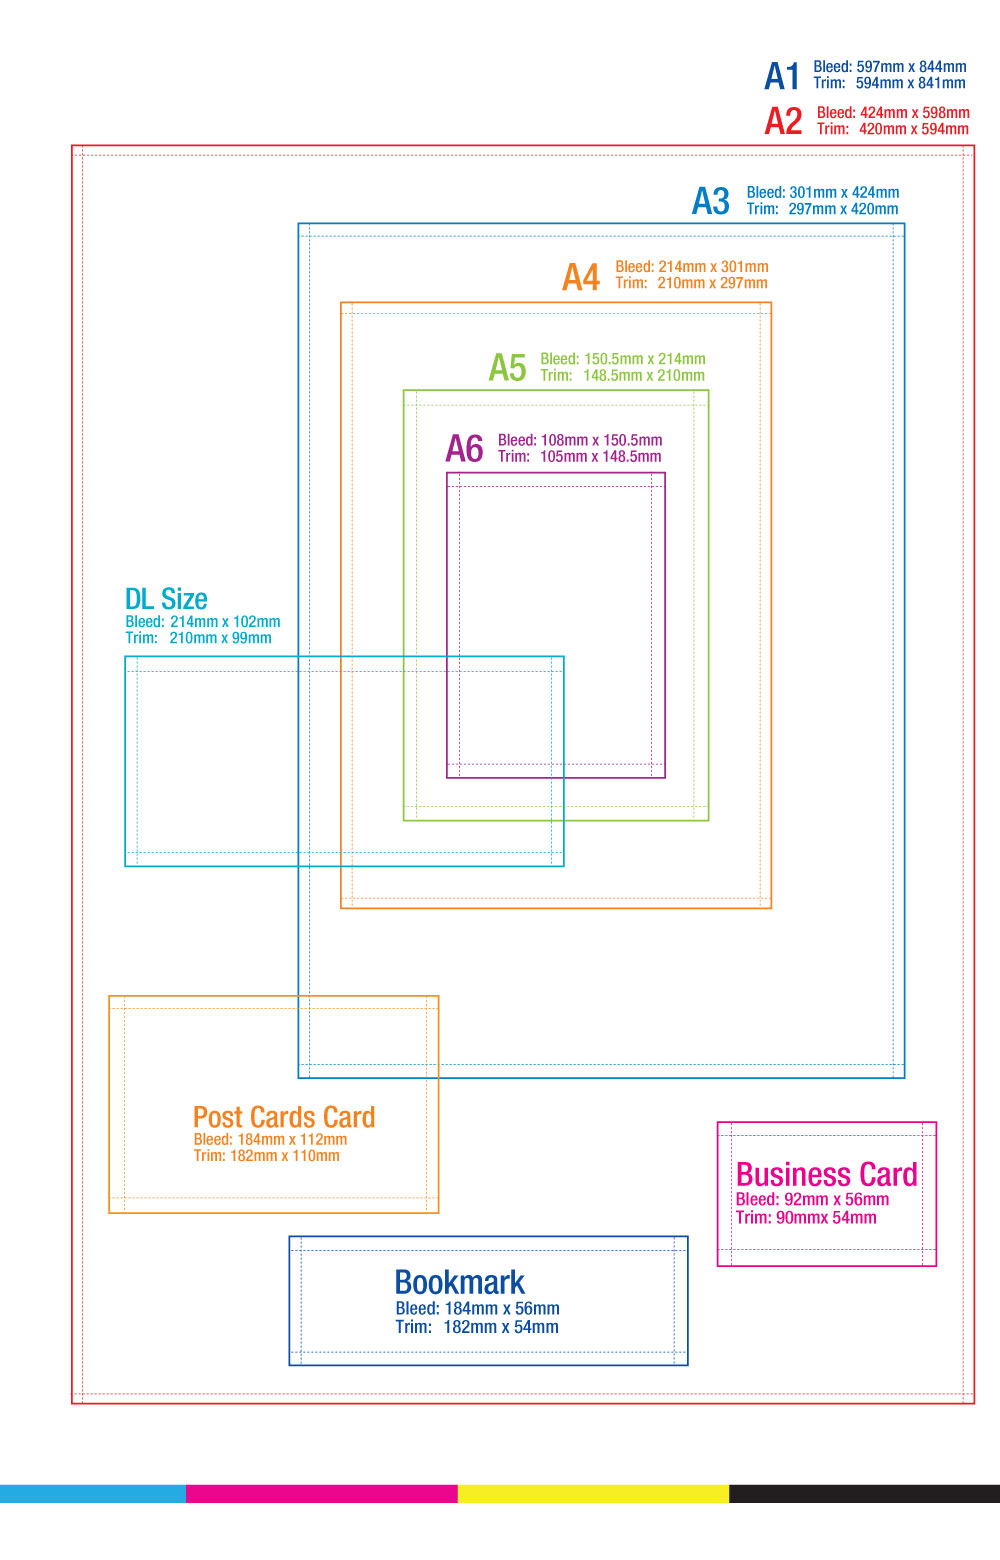 How To Print Legal Size Pdf On Letter Size Paper Sarah Smith